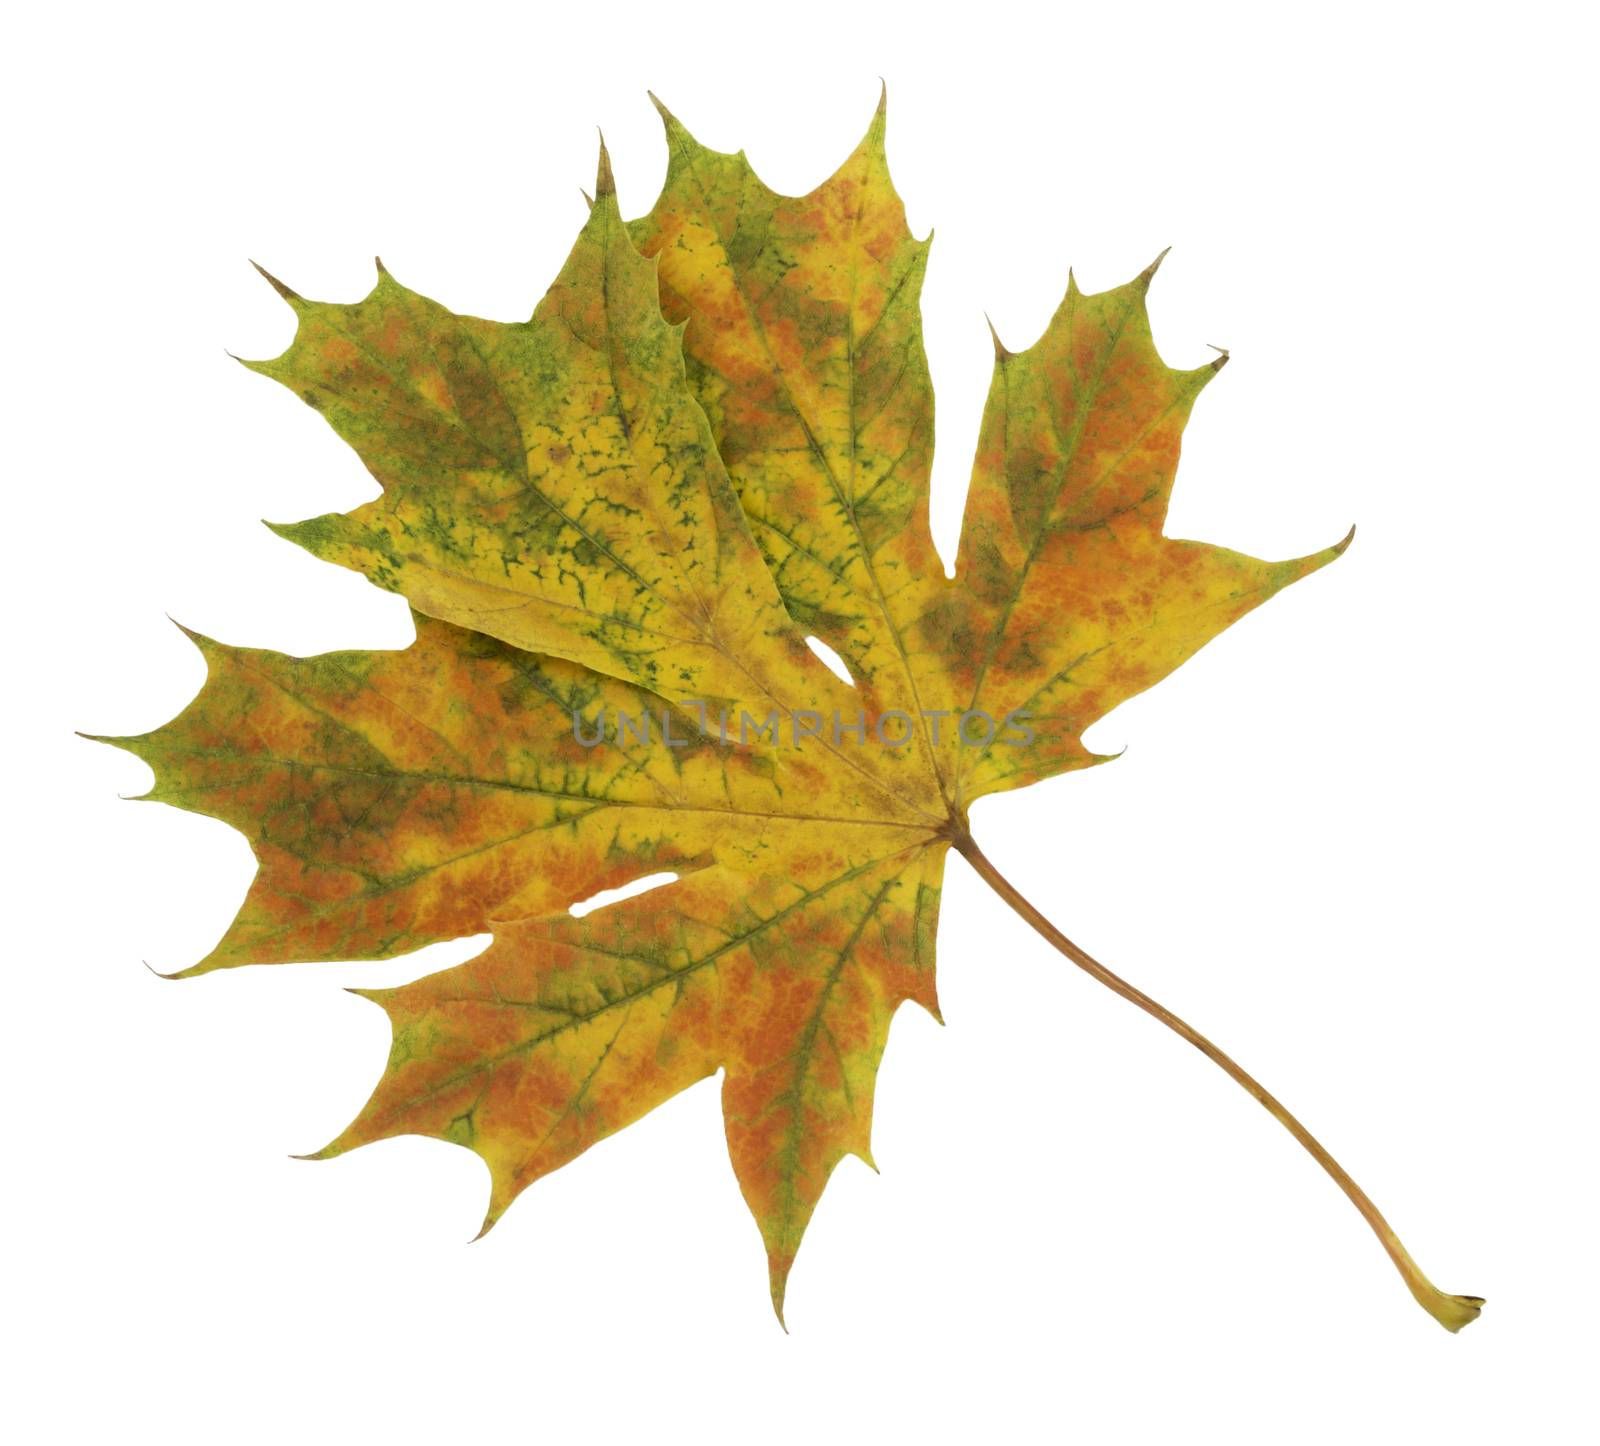 Closeup of brightly colored autumn leaf isolated colorful on white background4